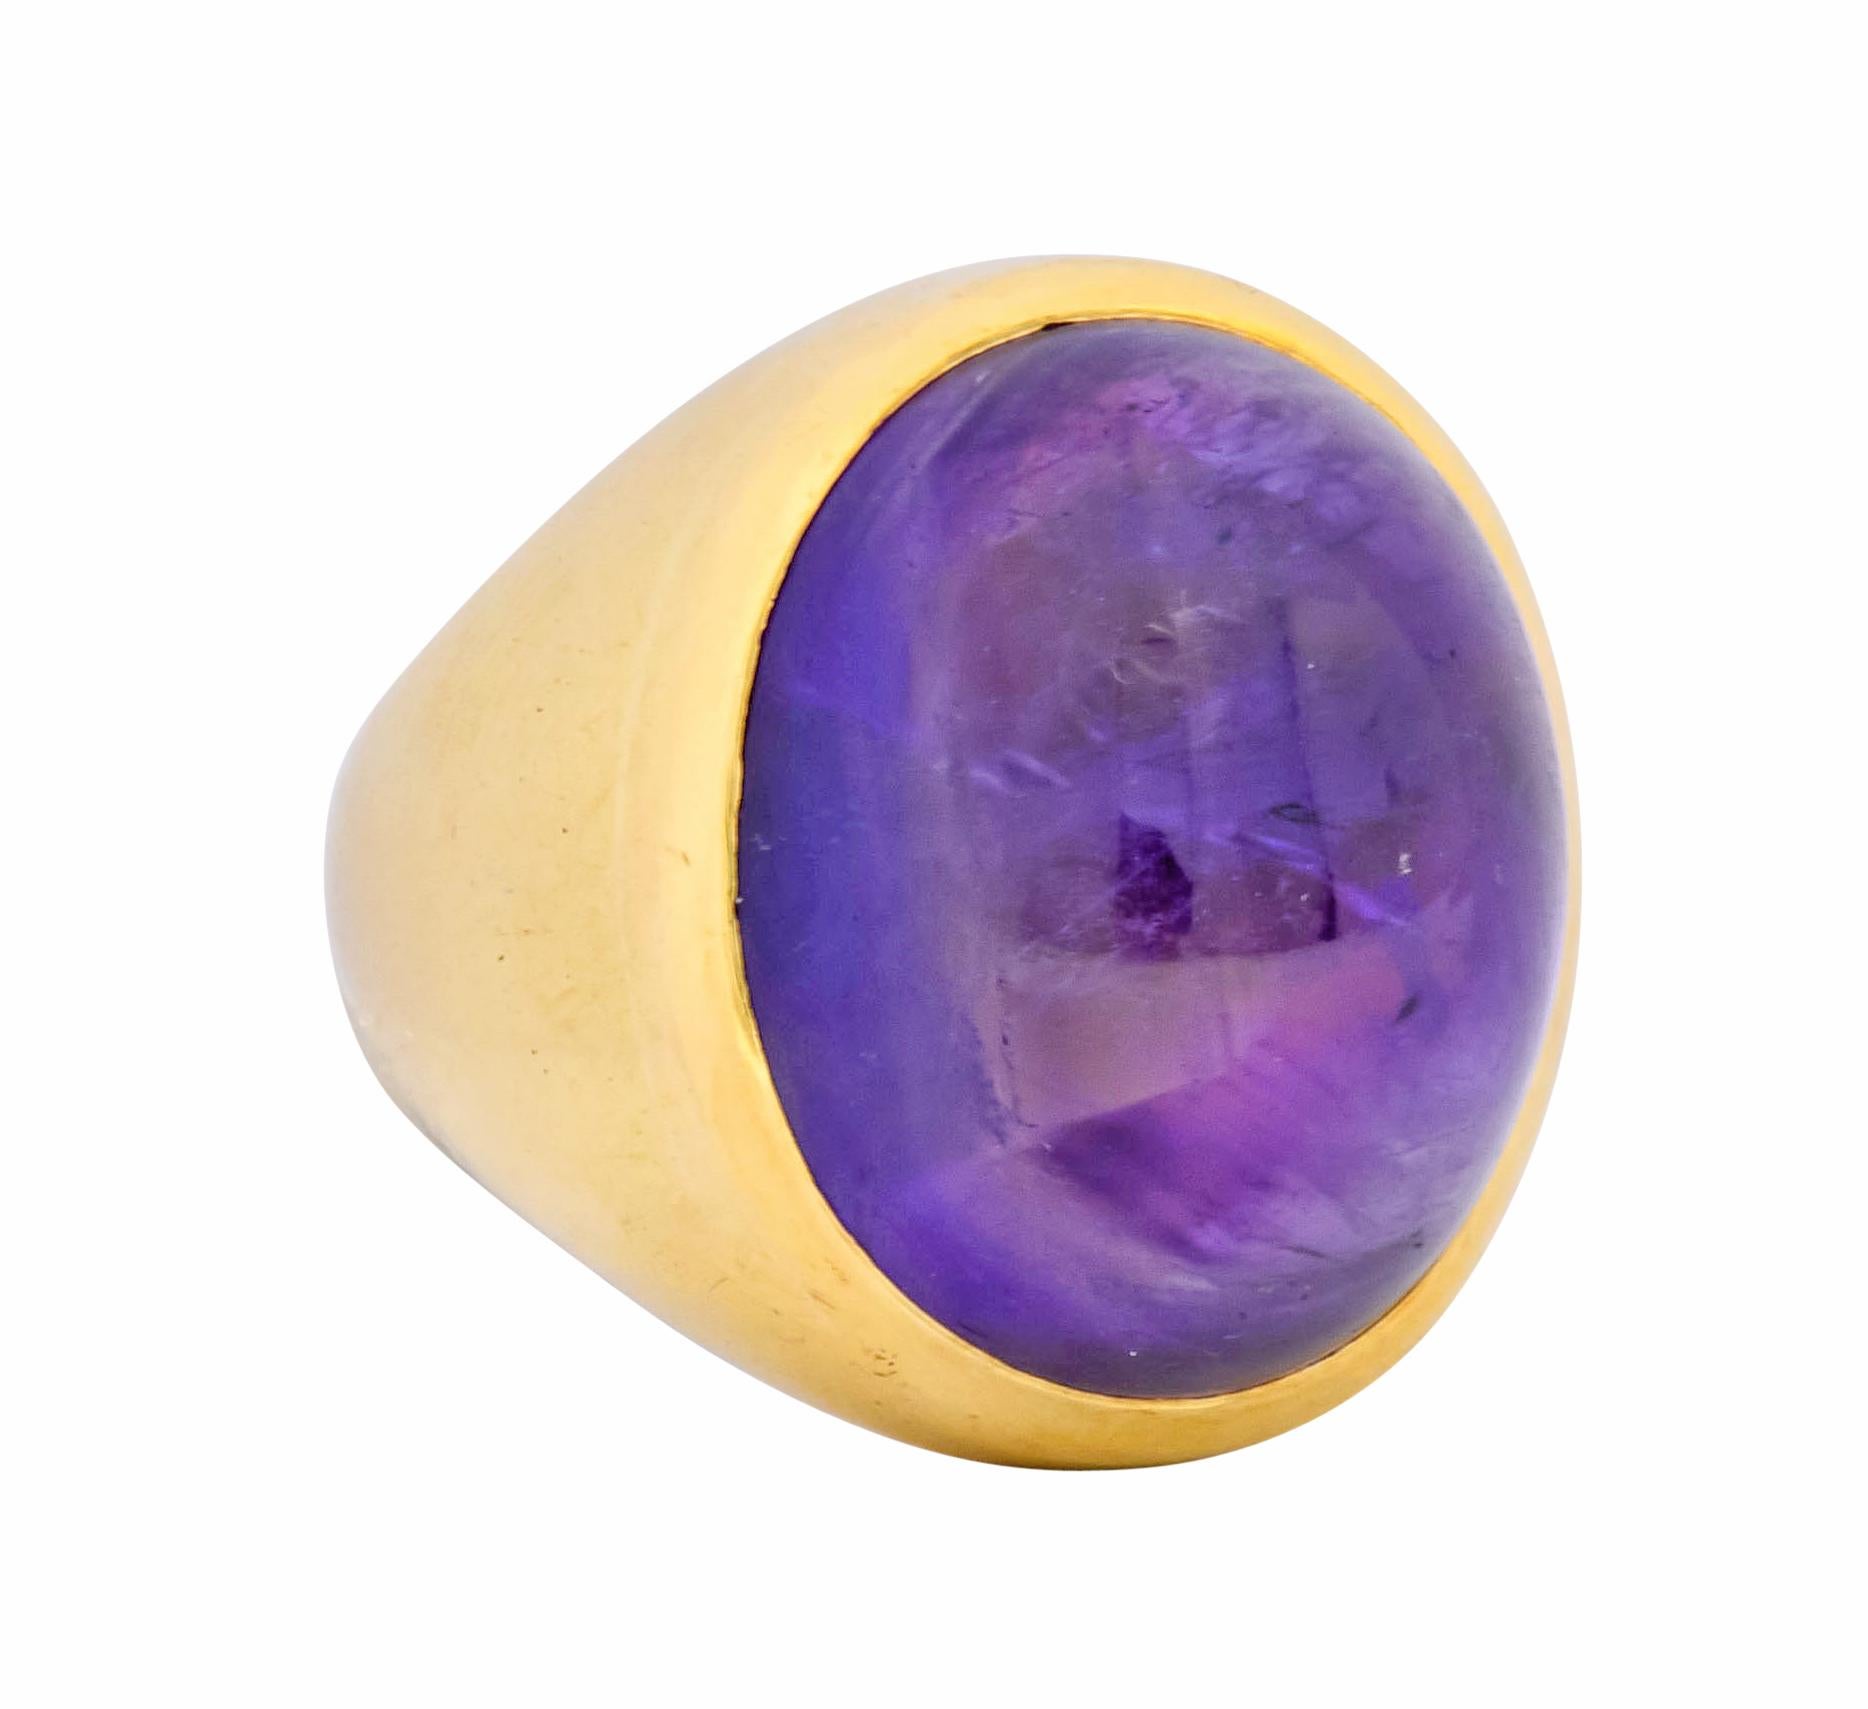 Centering an oval amethyst cabochon measuring approximately 19.2 x 16.0 mm, translucent purple with incredible natural inclusions

Bezel set in a polished gold surround with tapered shoulders

Tested as 18 karat gold

Ring Size: 5 1/2 &